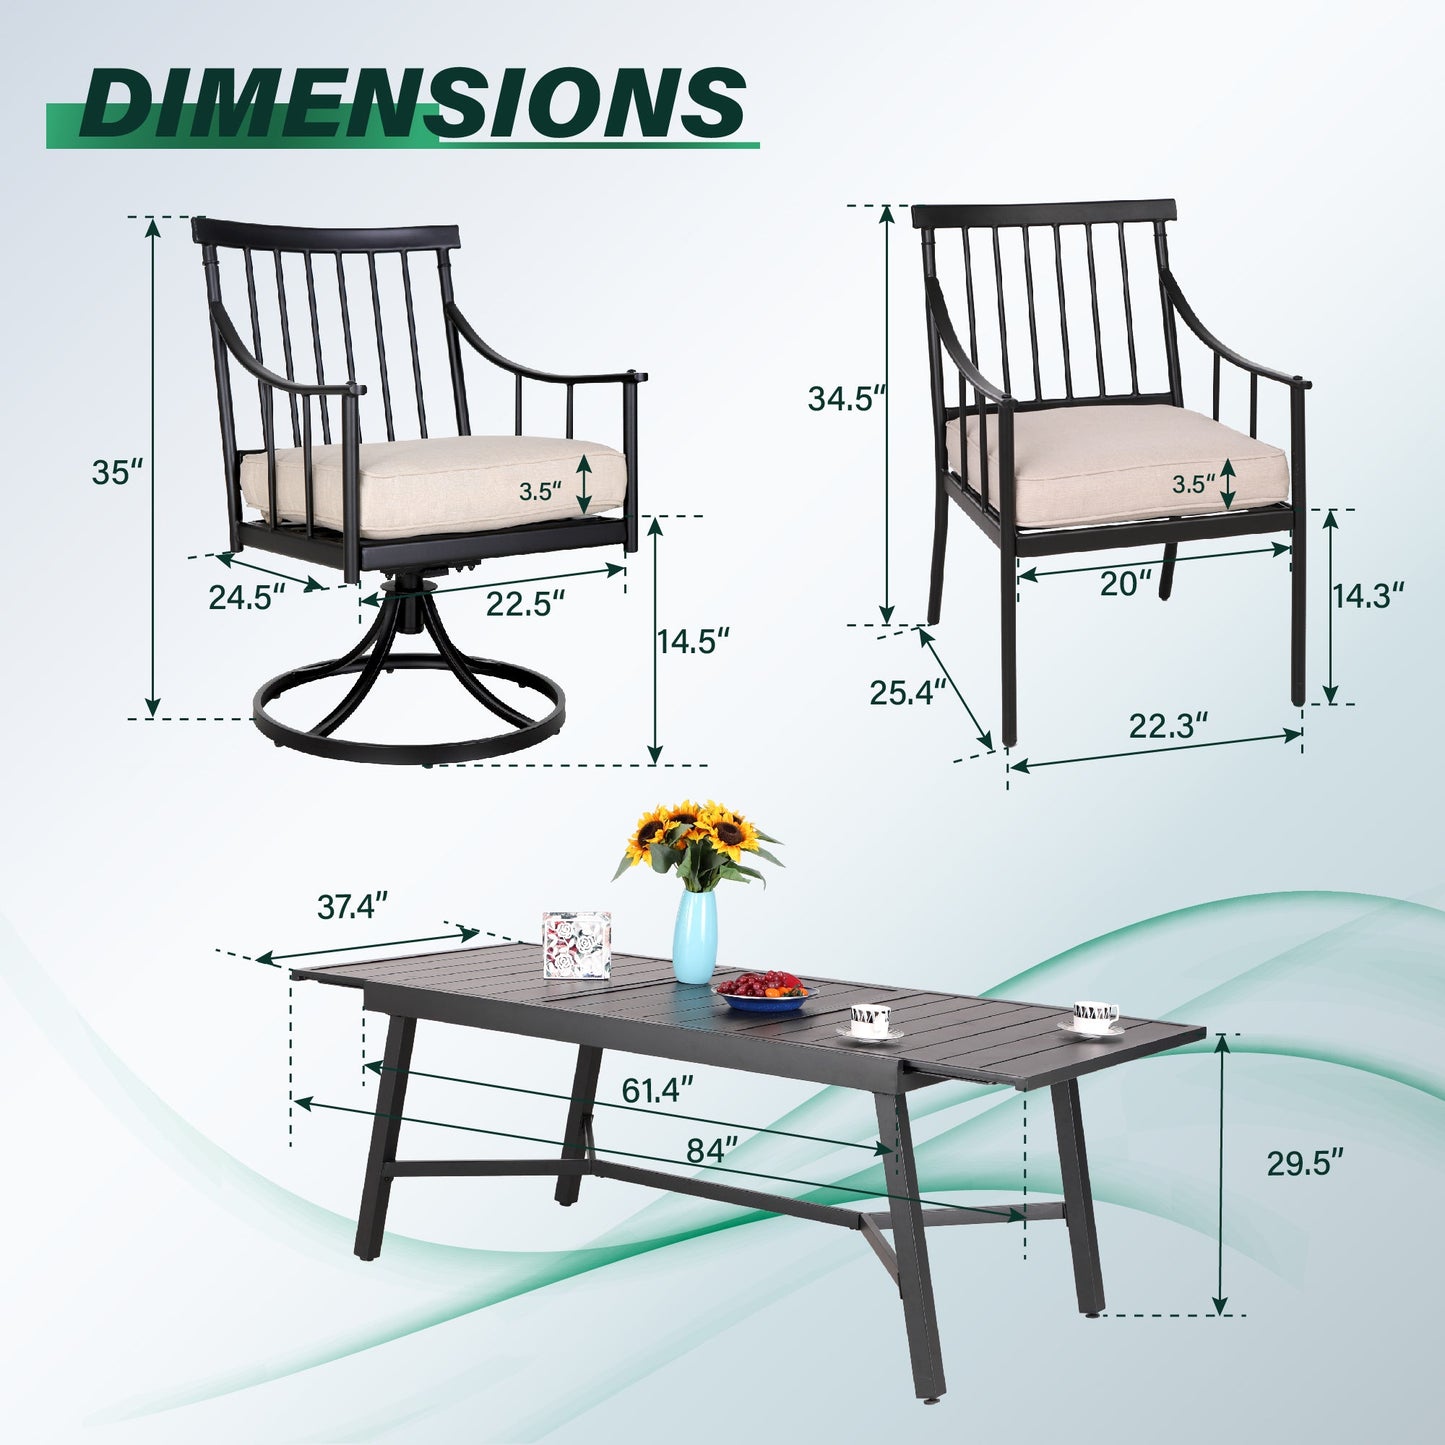 Sophia & William 7 Pieces Metal Patio Dining Set Swivel Chairs and Extendable Table Set